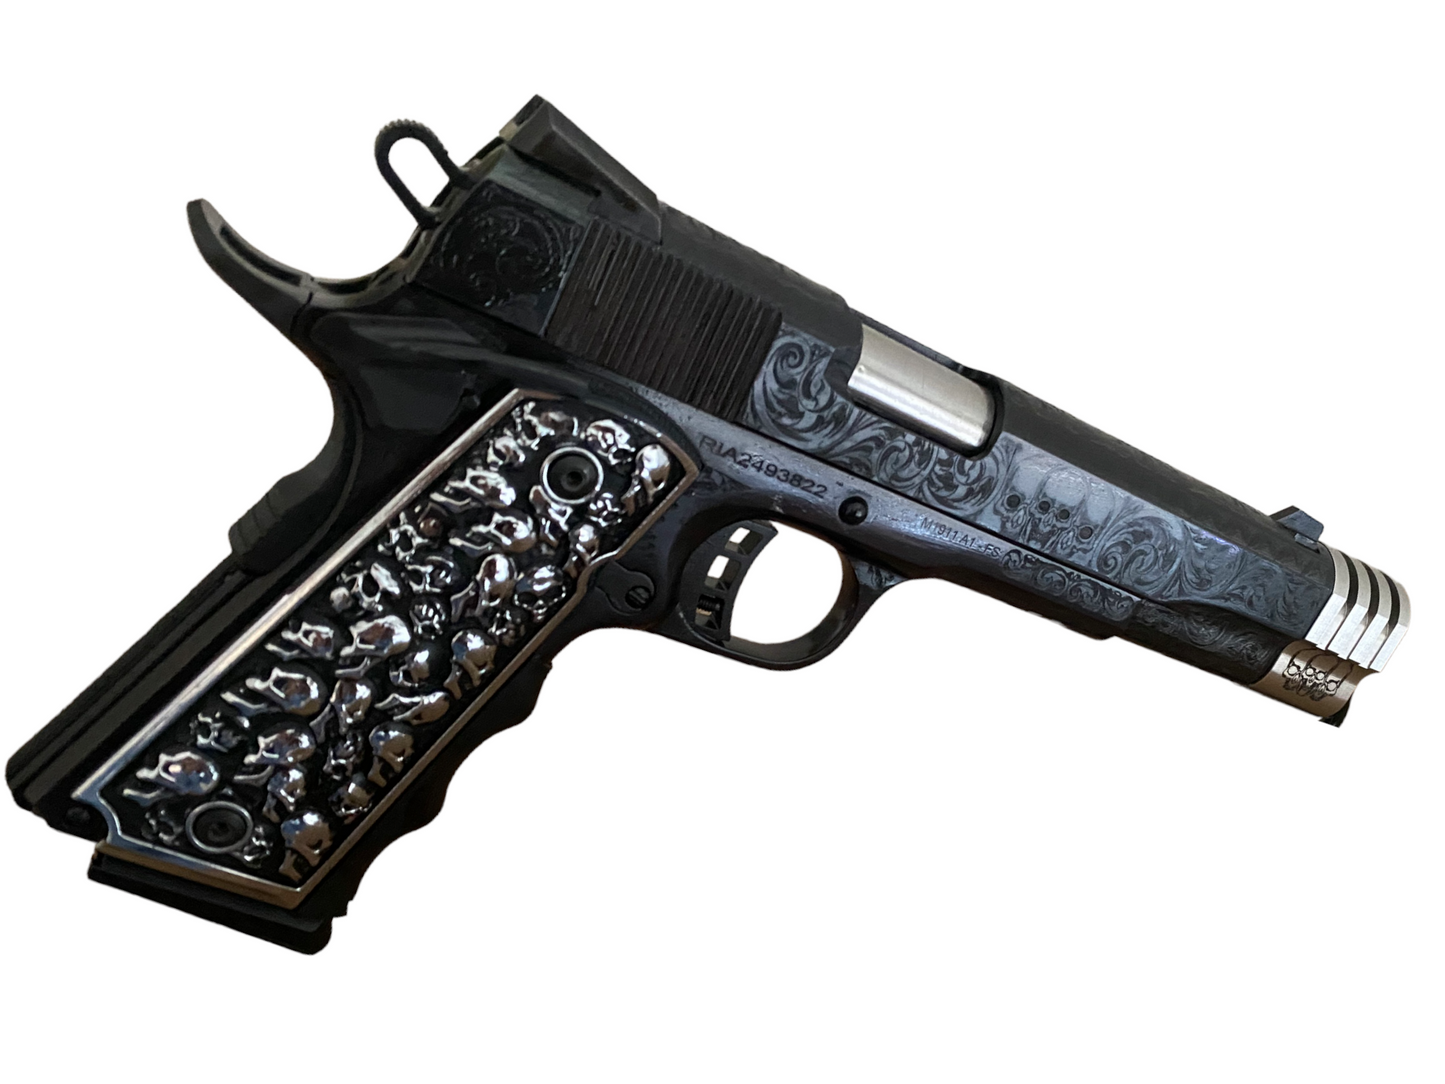 ROCK ISLAND 1911 FULL ENGRAVED AND BLUED